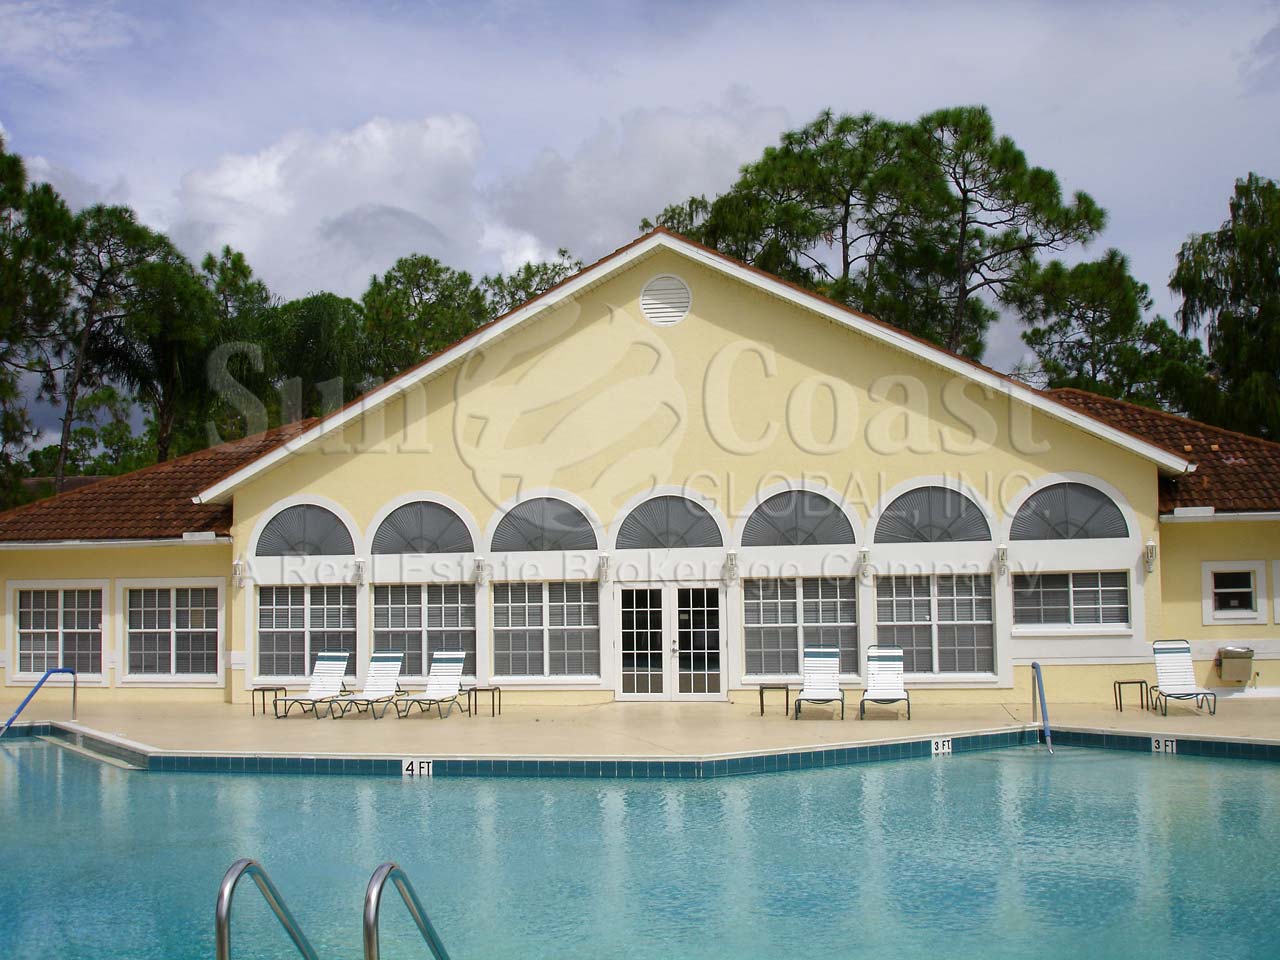 DEAUVILLE LAKE CLUB Community Pool and Clubhouse